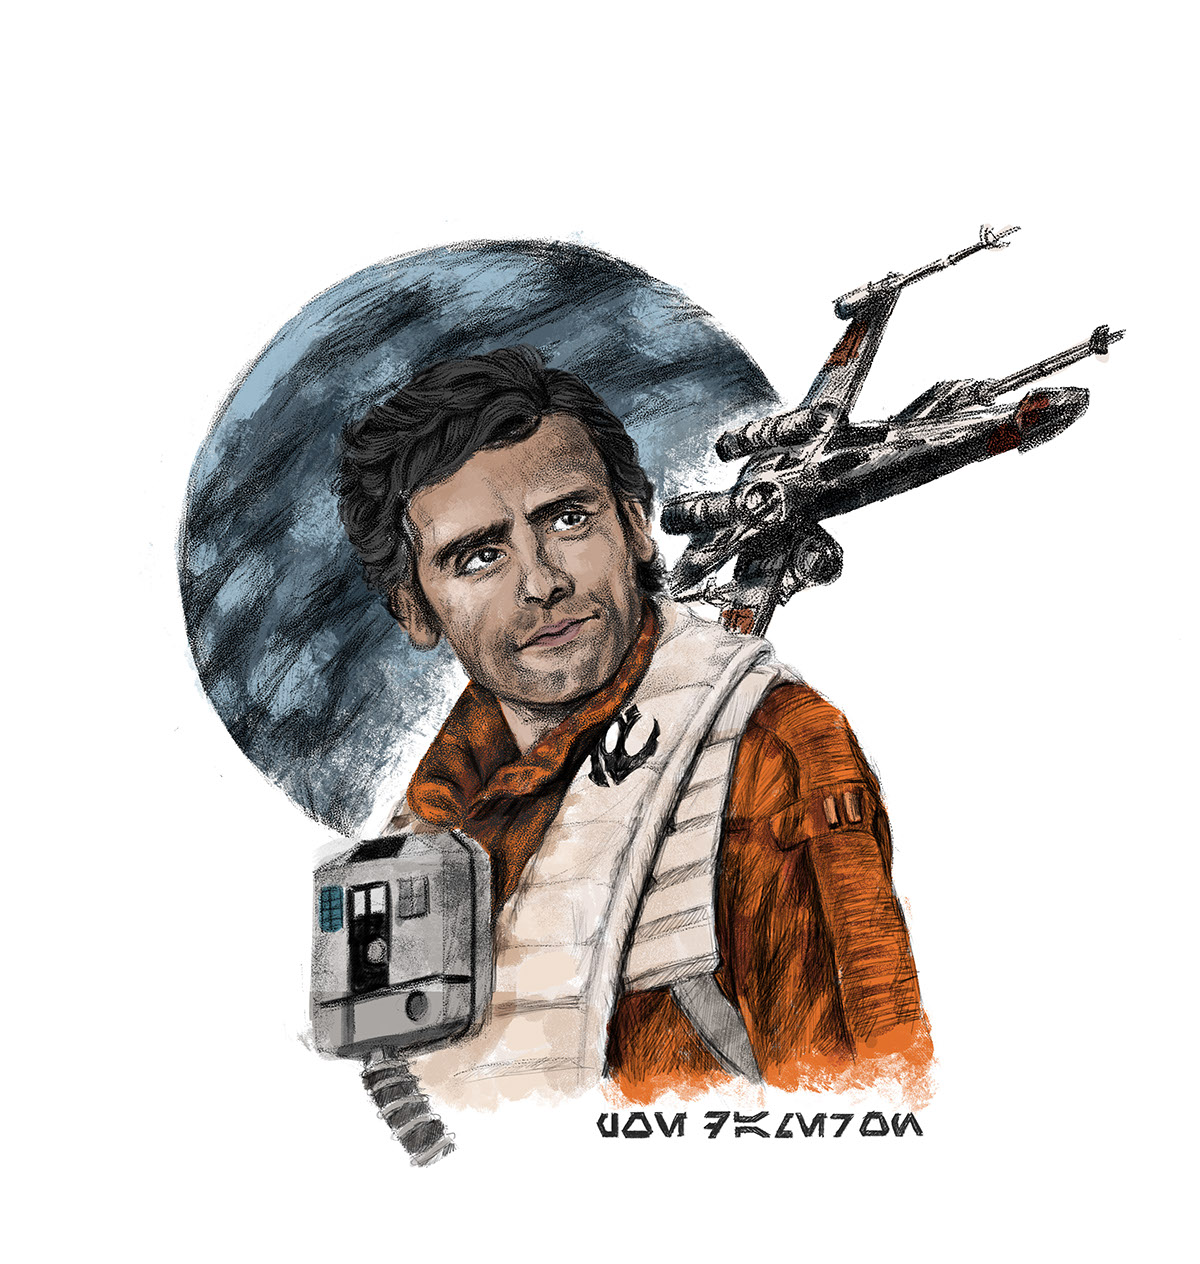 Poe dameron star Wars May the fourth be with You starpilot X-wing starfighter yavin